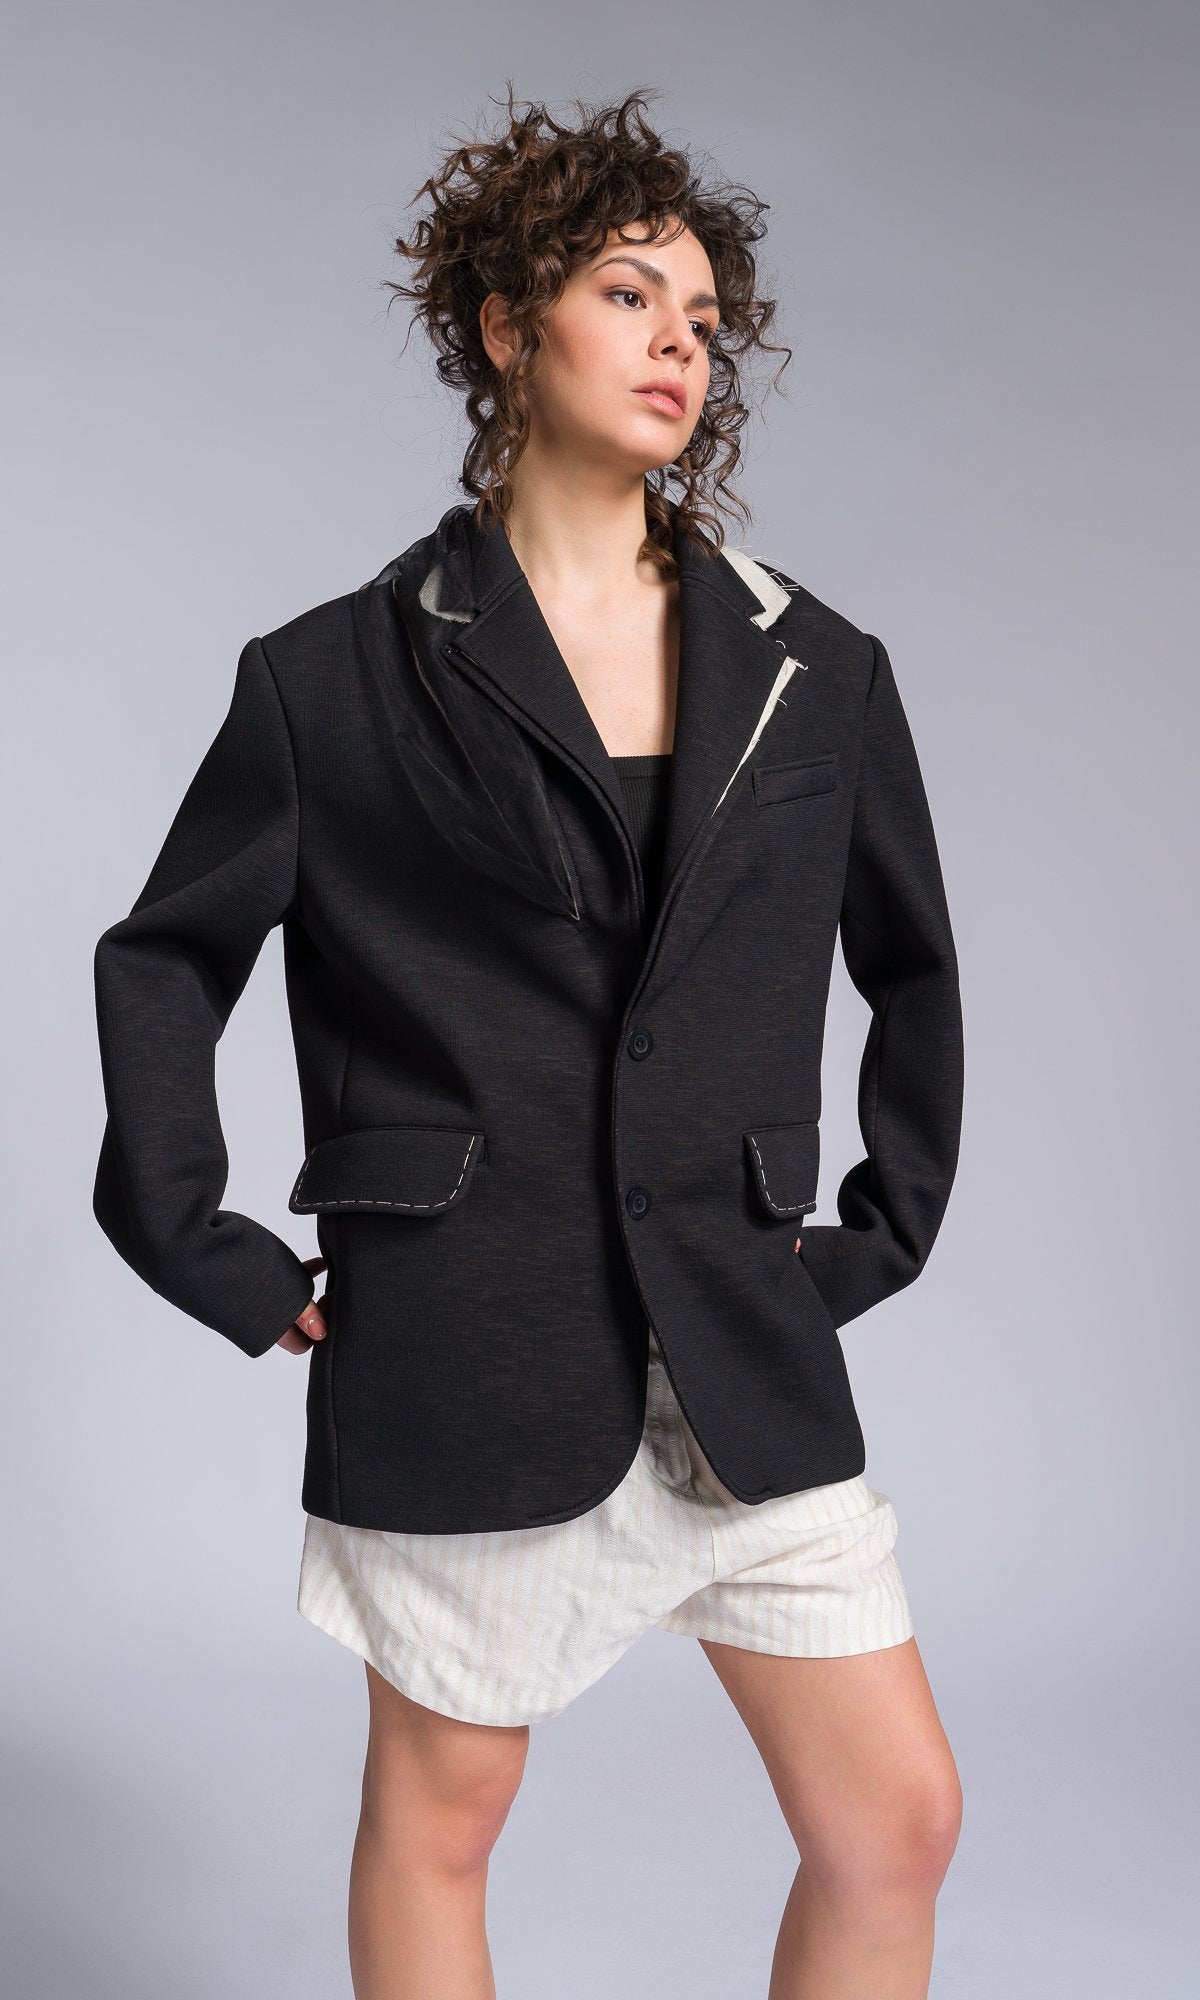 Masculine-cut Blazer with Contrasting Details